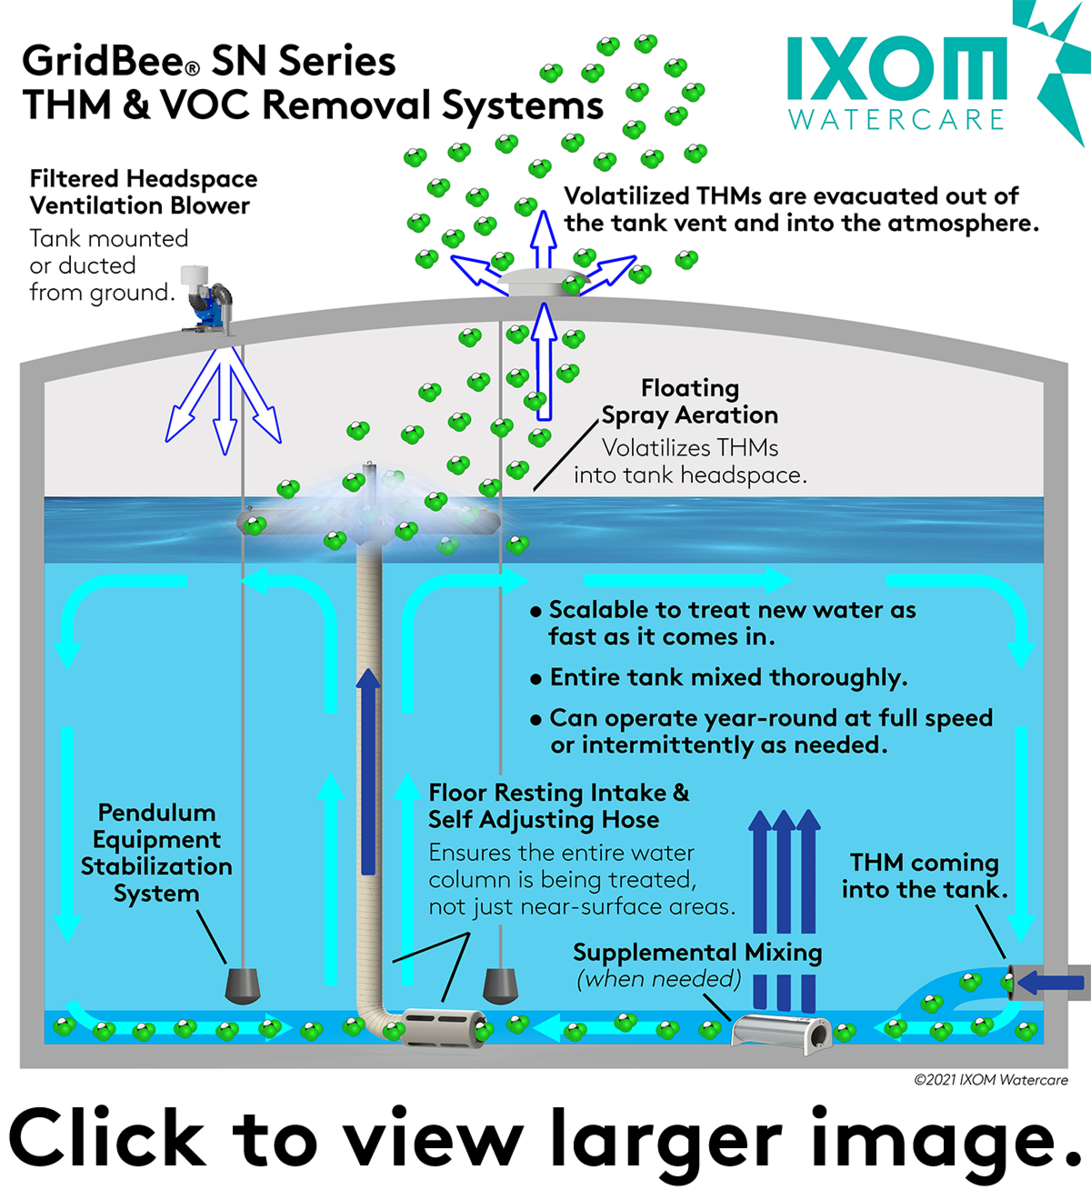 image detailing the basics of a floating spray aeration system to remove THM and VOC